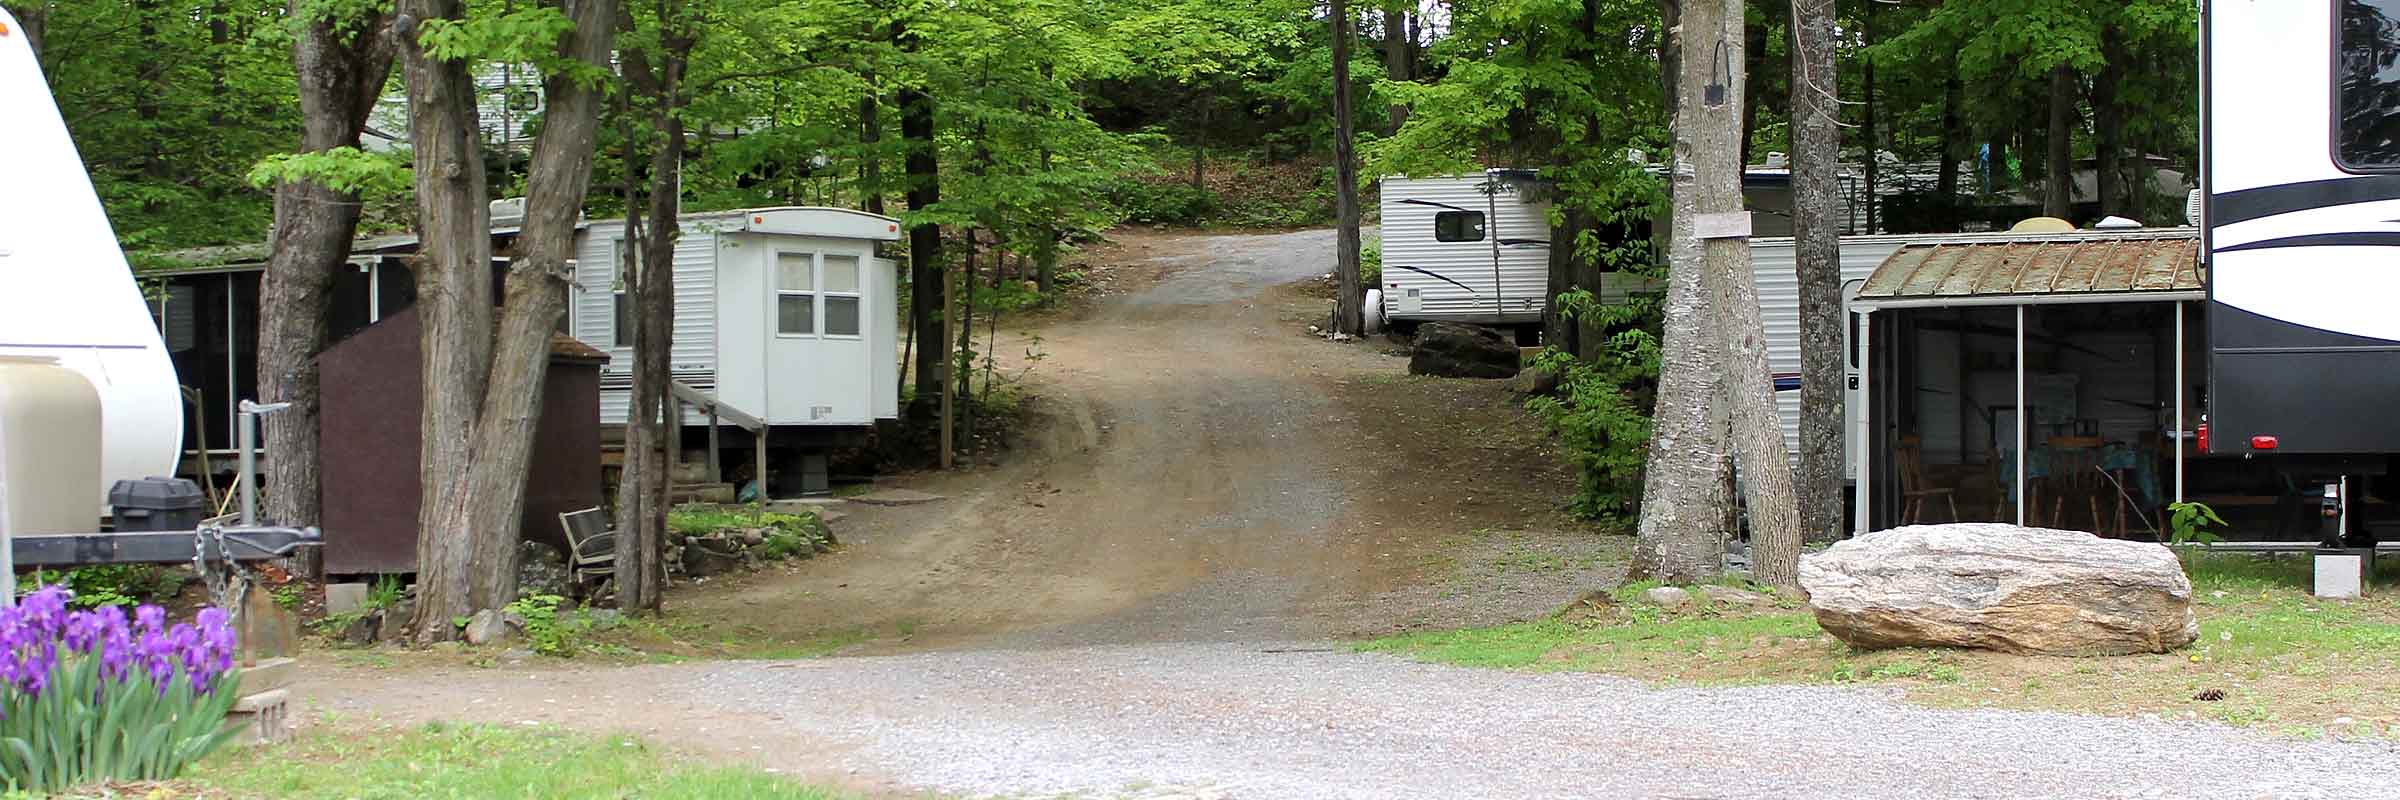 View of several trailer sites at Pickerel Bay Lodge